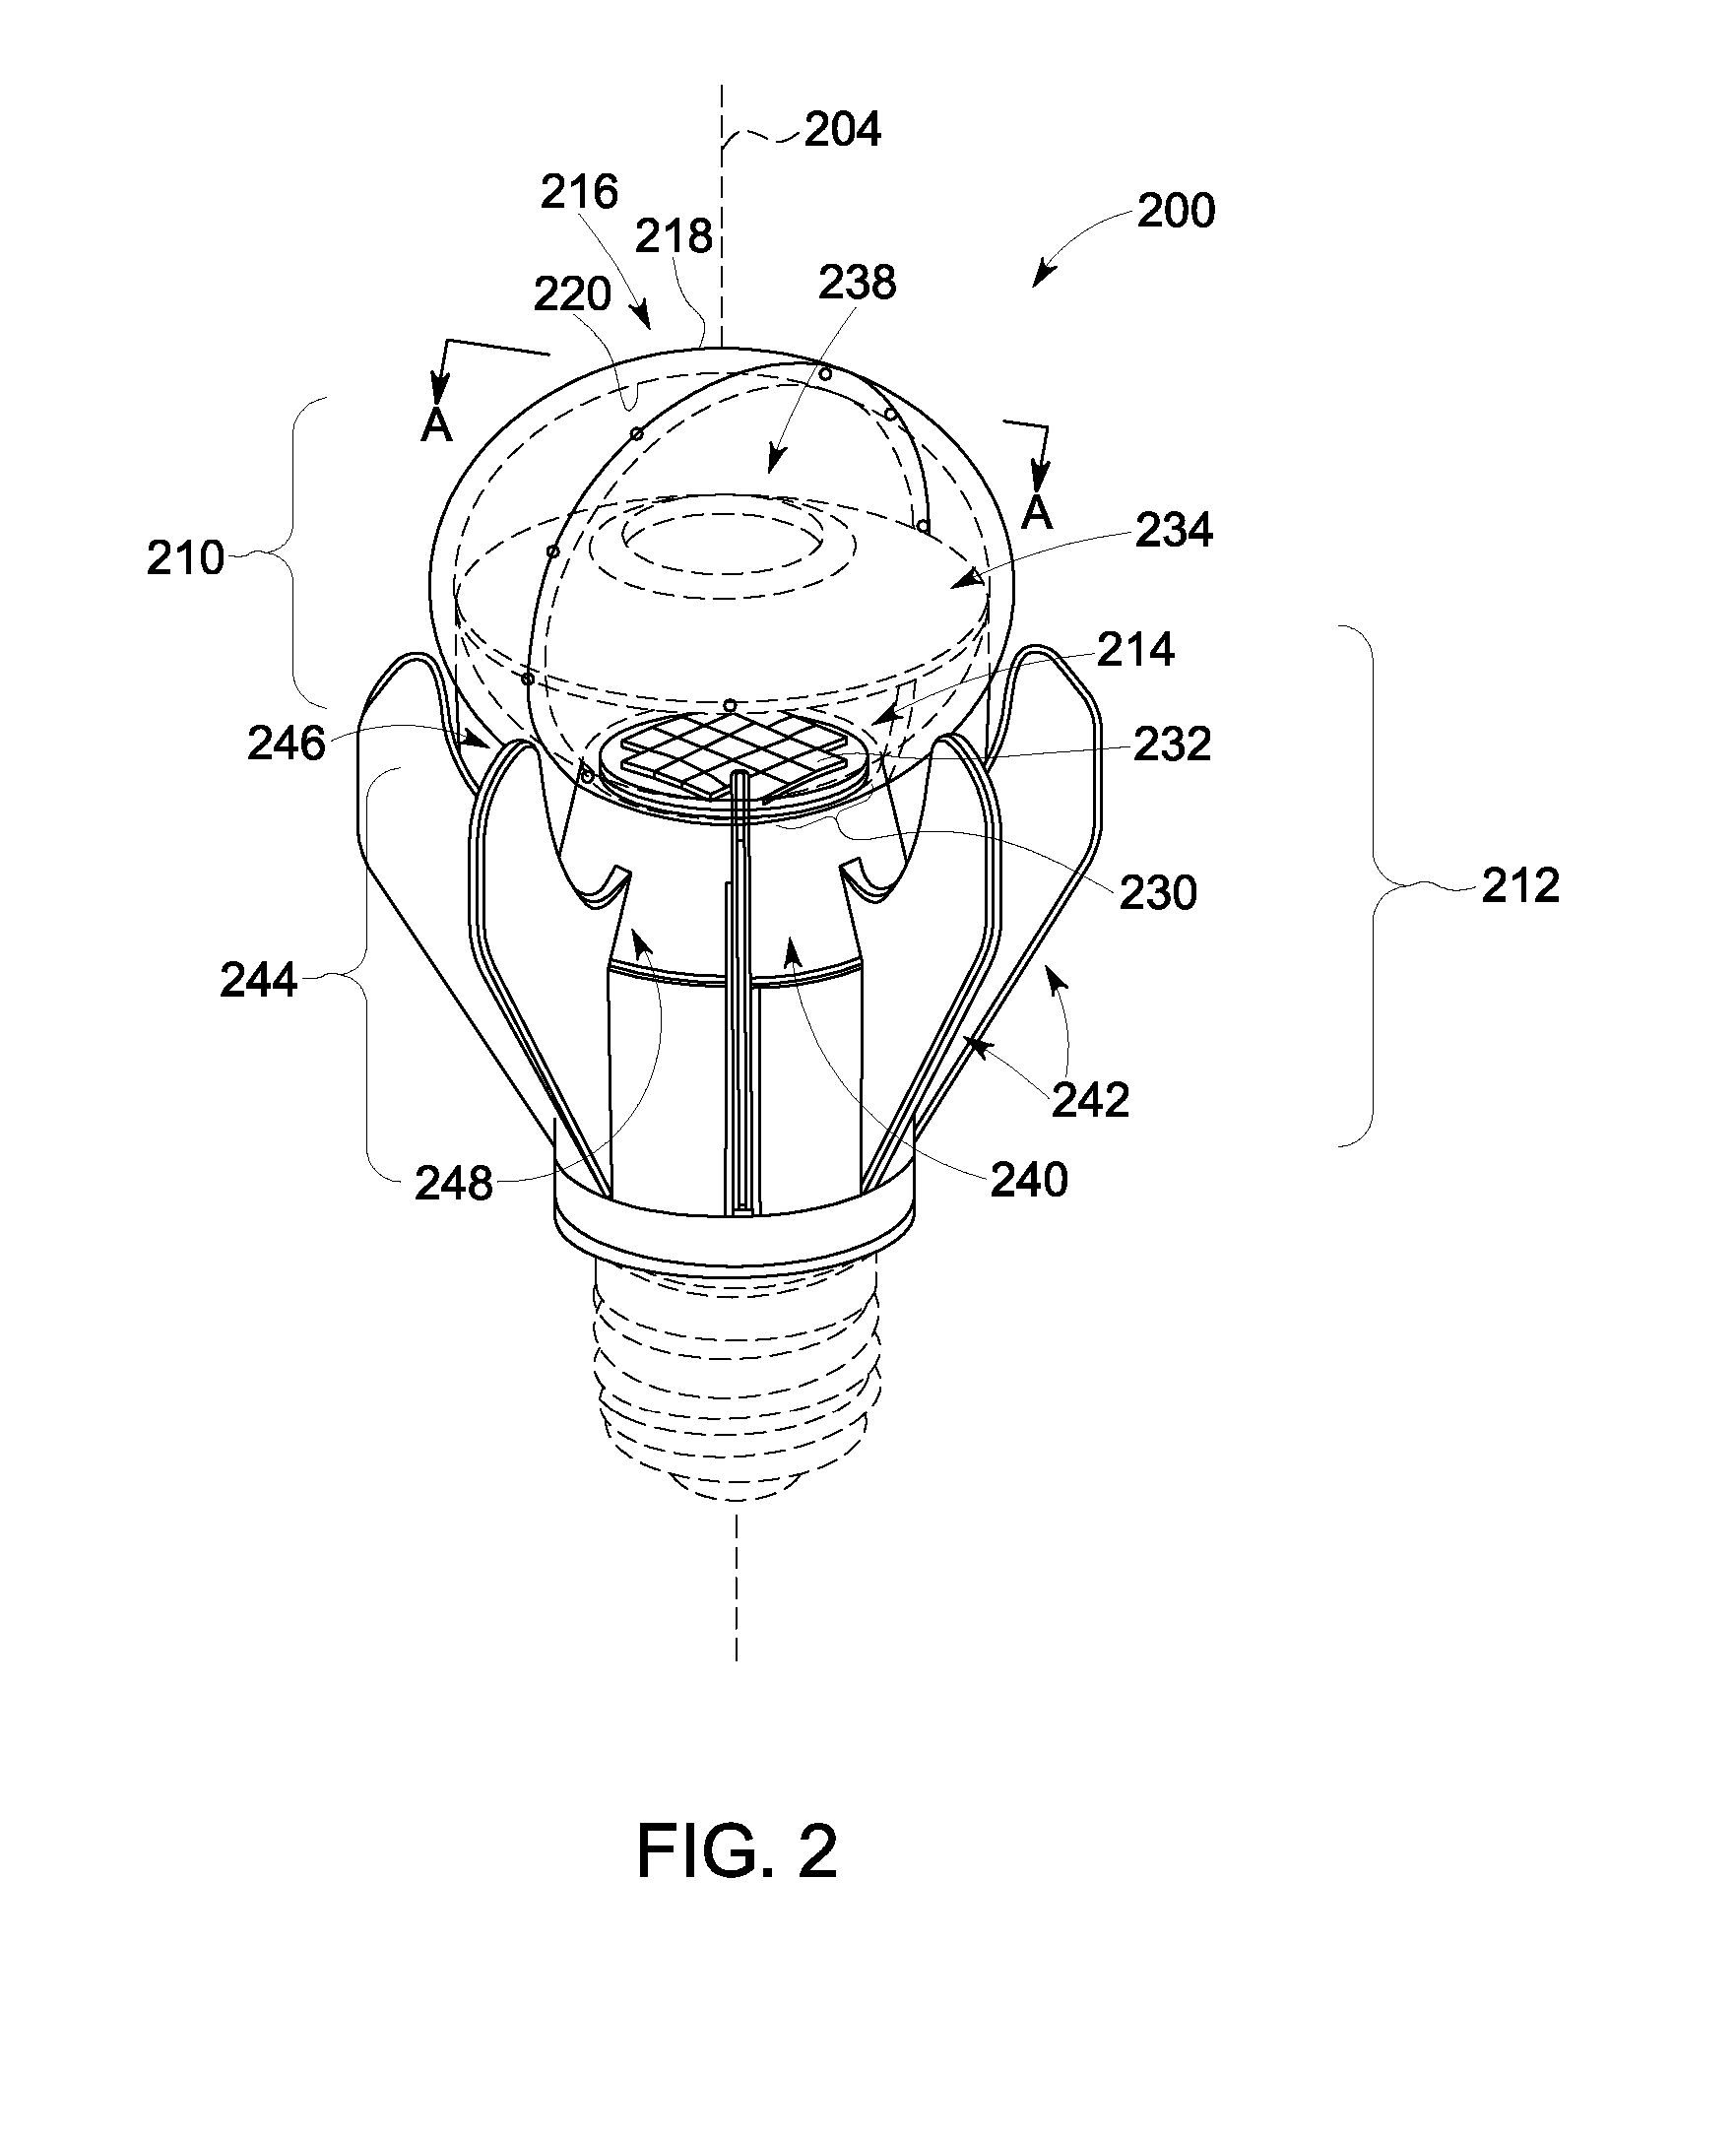 Lighting apparatus with a light source comprising light emitting diodes